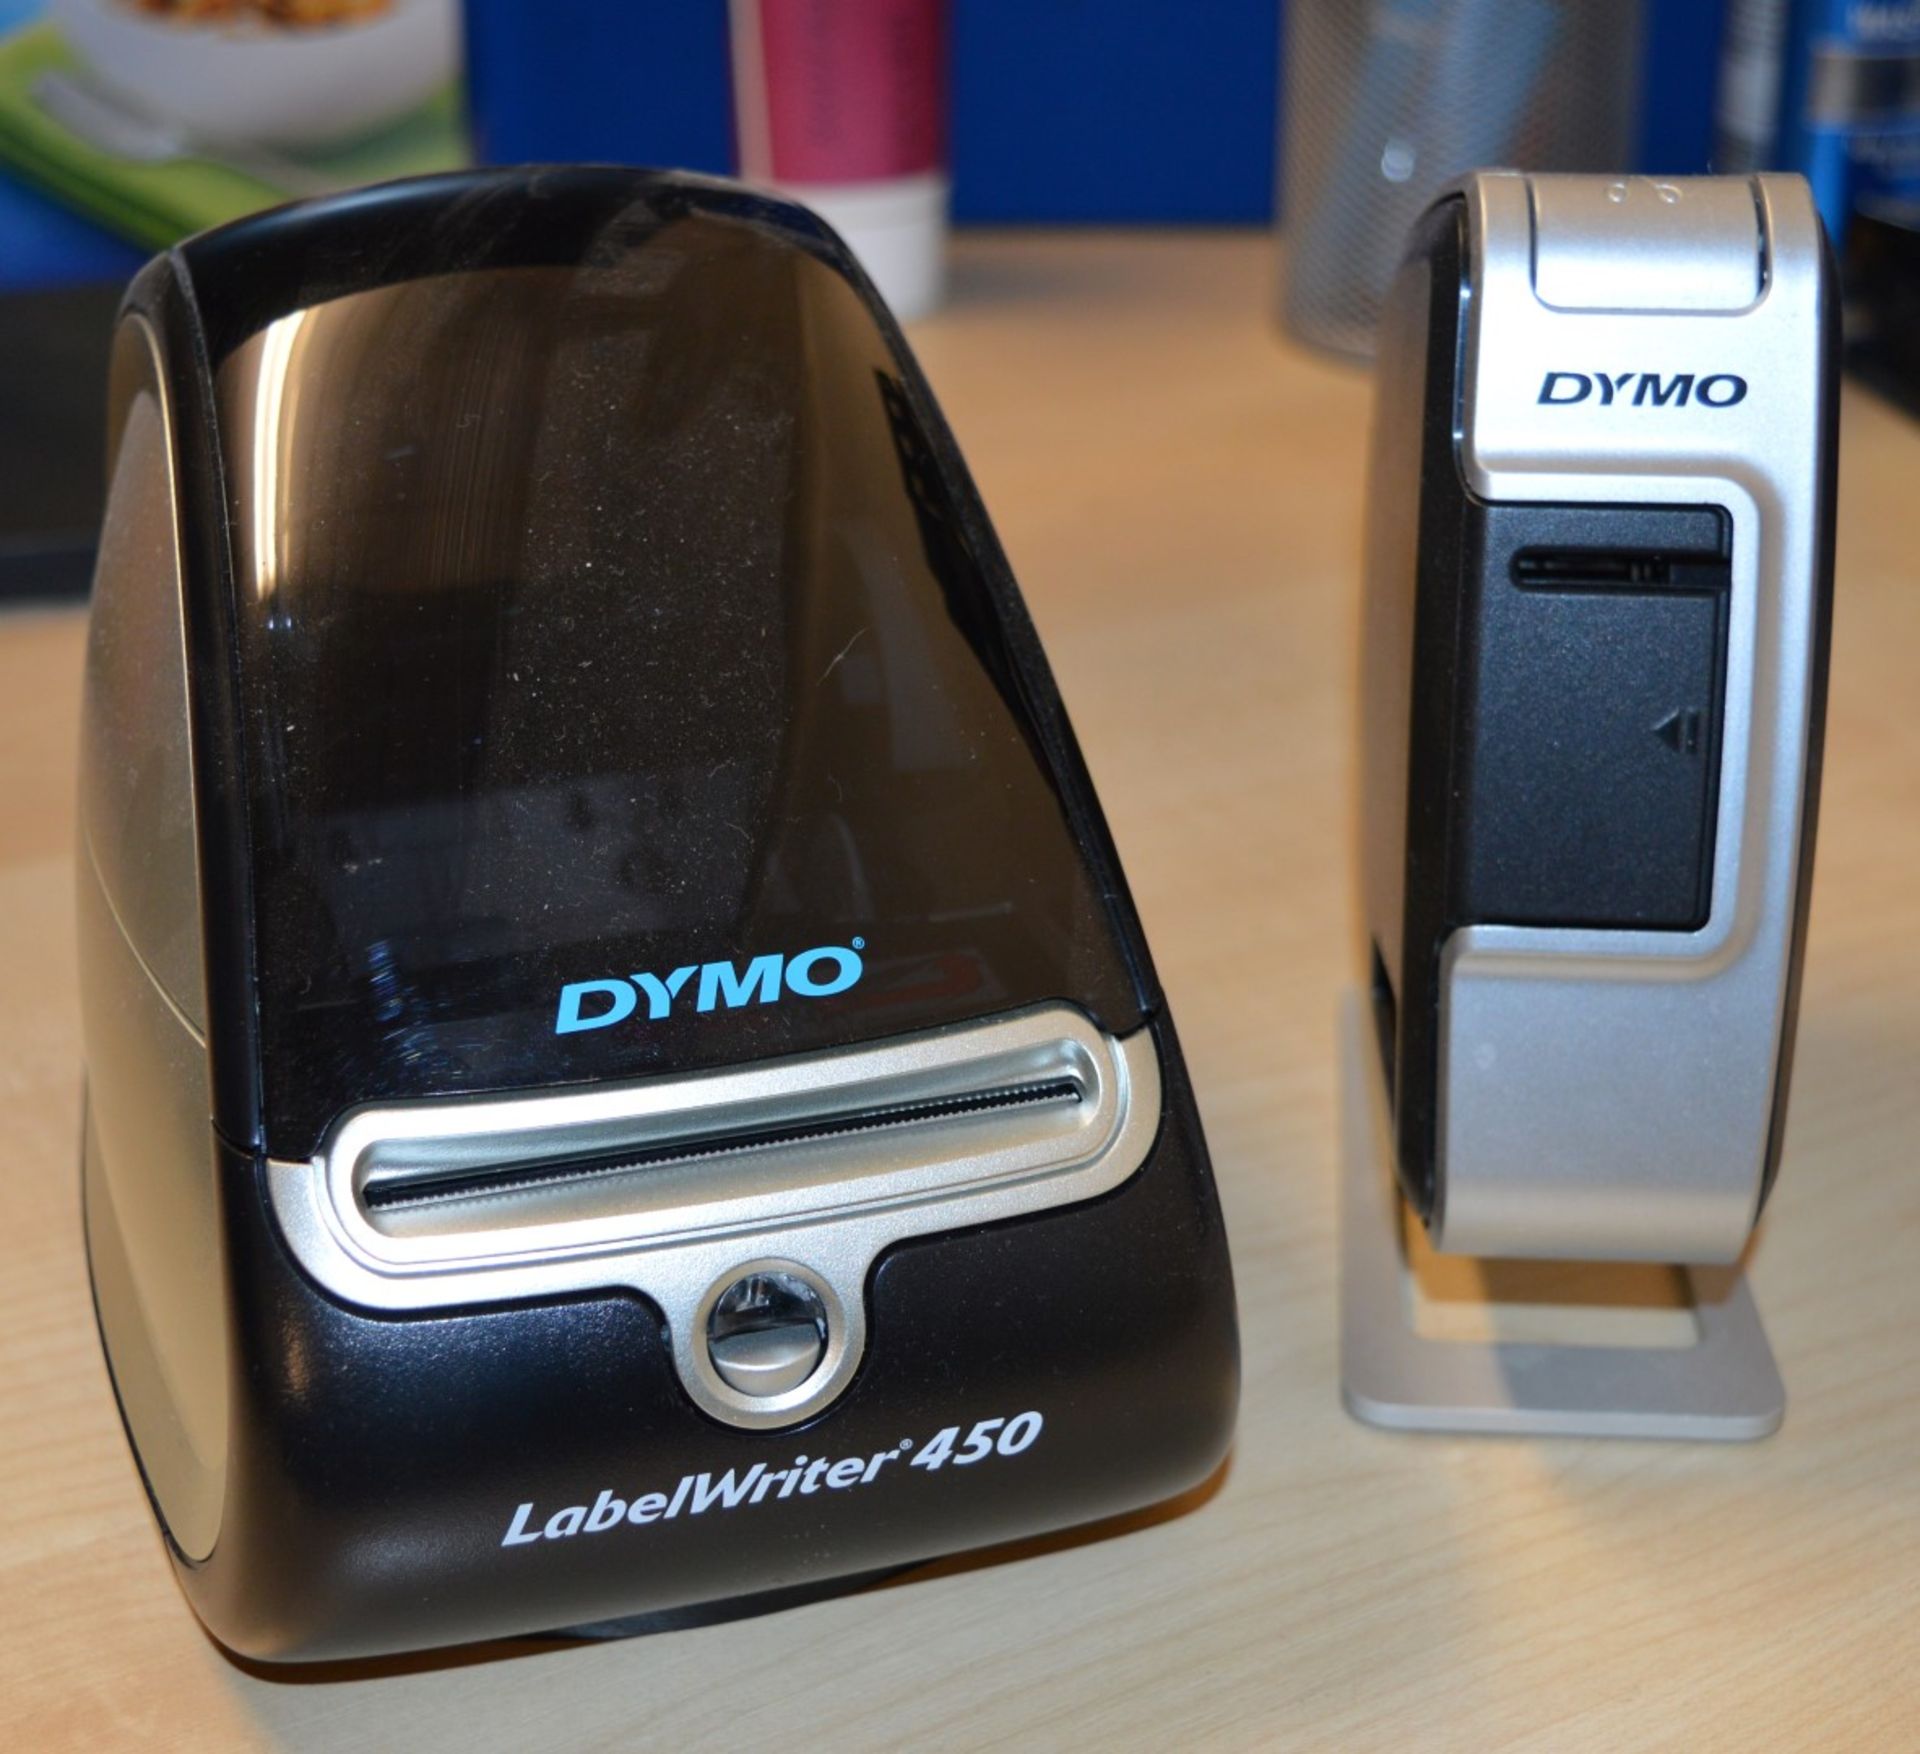 2 x Dymo Label Printers - Includes Label Writer 450 - No Leads Included - CL010 - Ref JP299 -